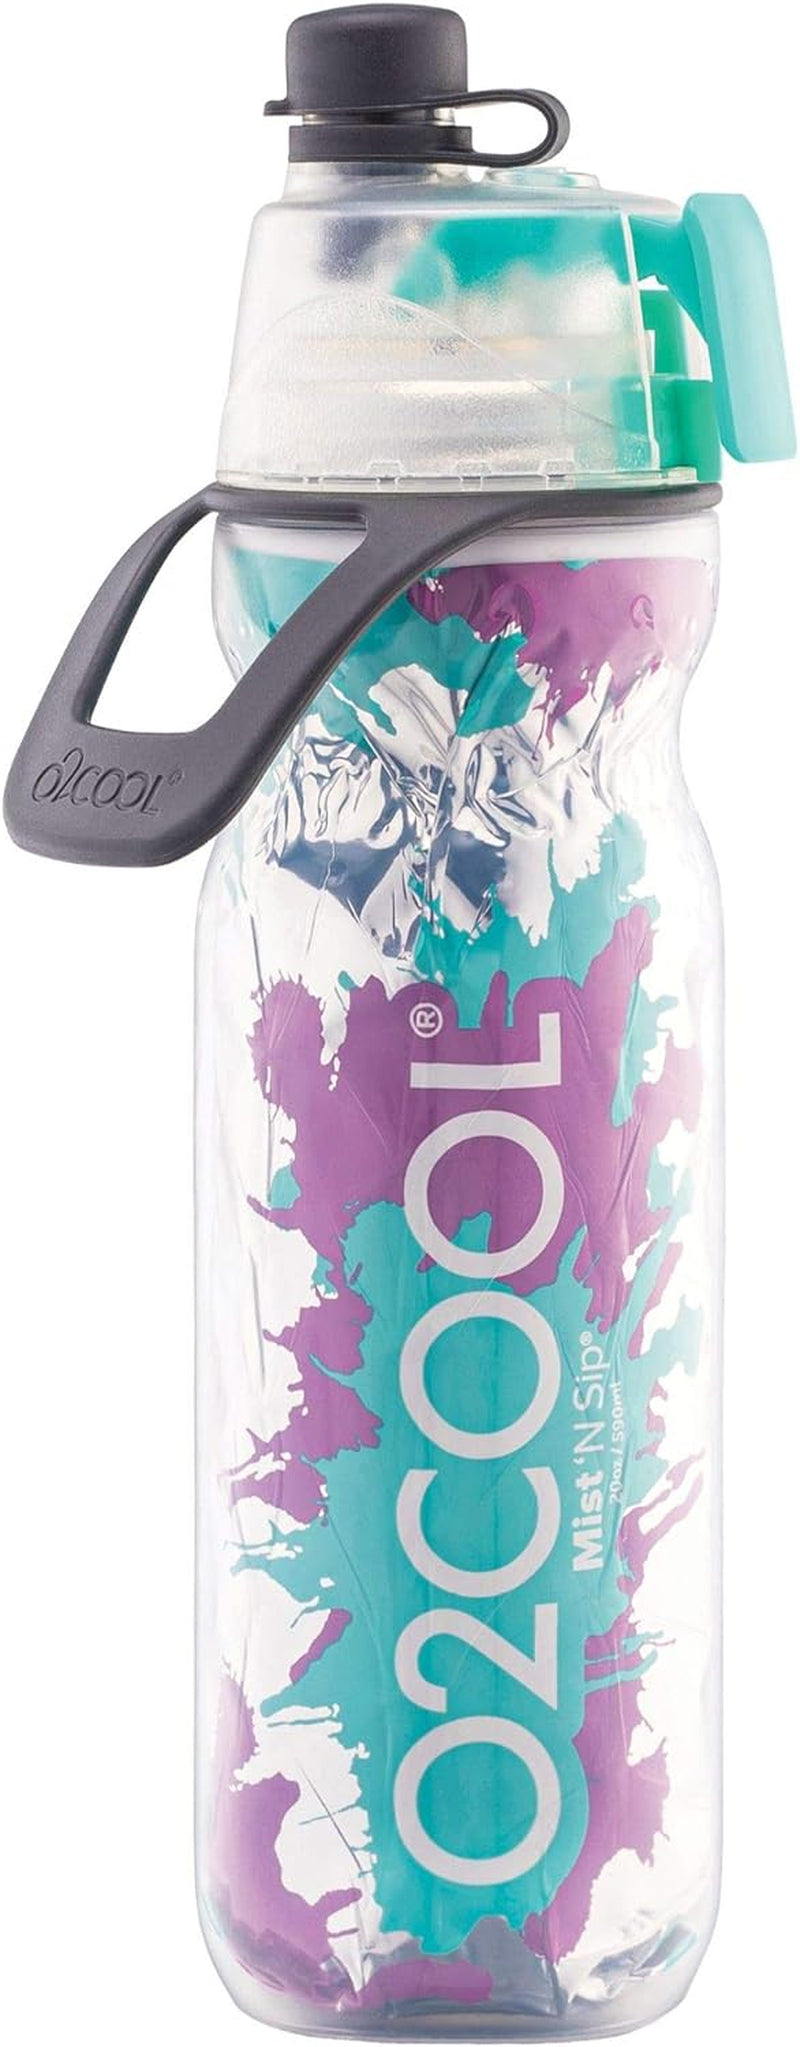 Arcticsqueeze Insulated Mist 'N Sip Water Bottle | BPA Free, 2-In-1 Mist and Sip Function W/No Leak, Locking Pull Top Spout : 20 Oz | Color Collection: Ombre, Raspberry Ombre